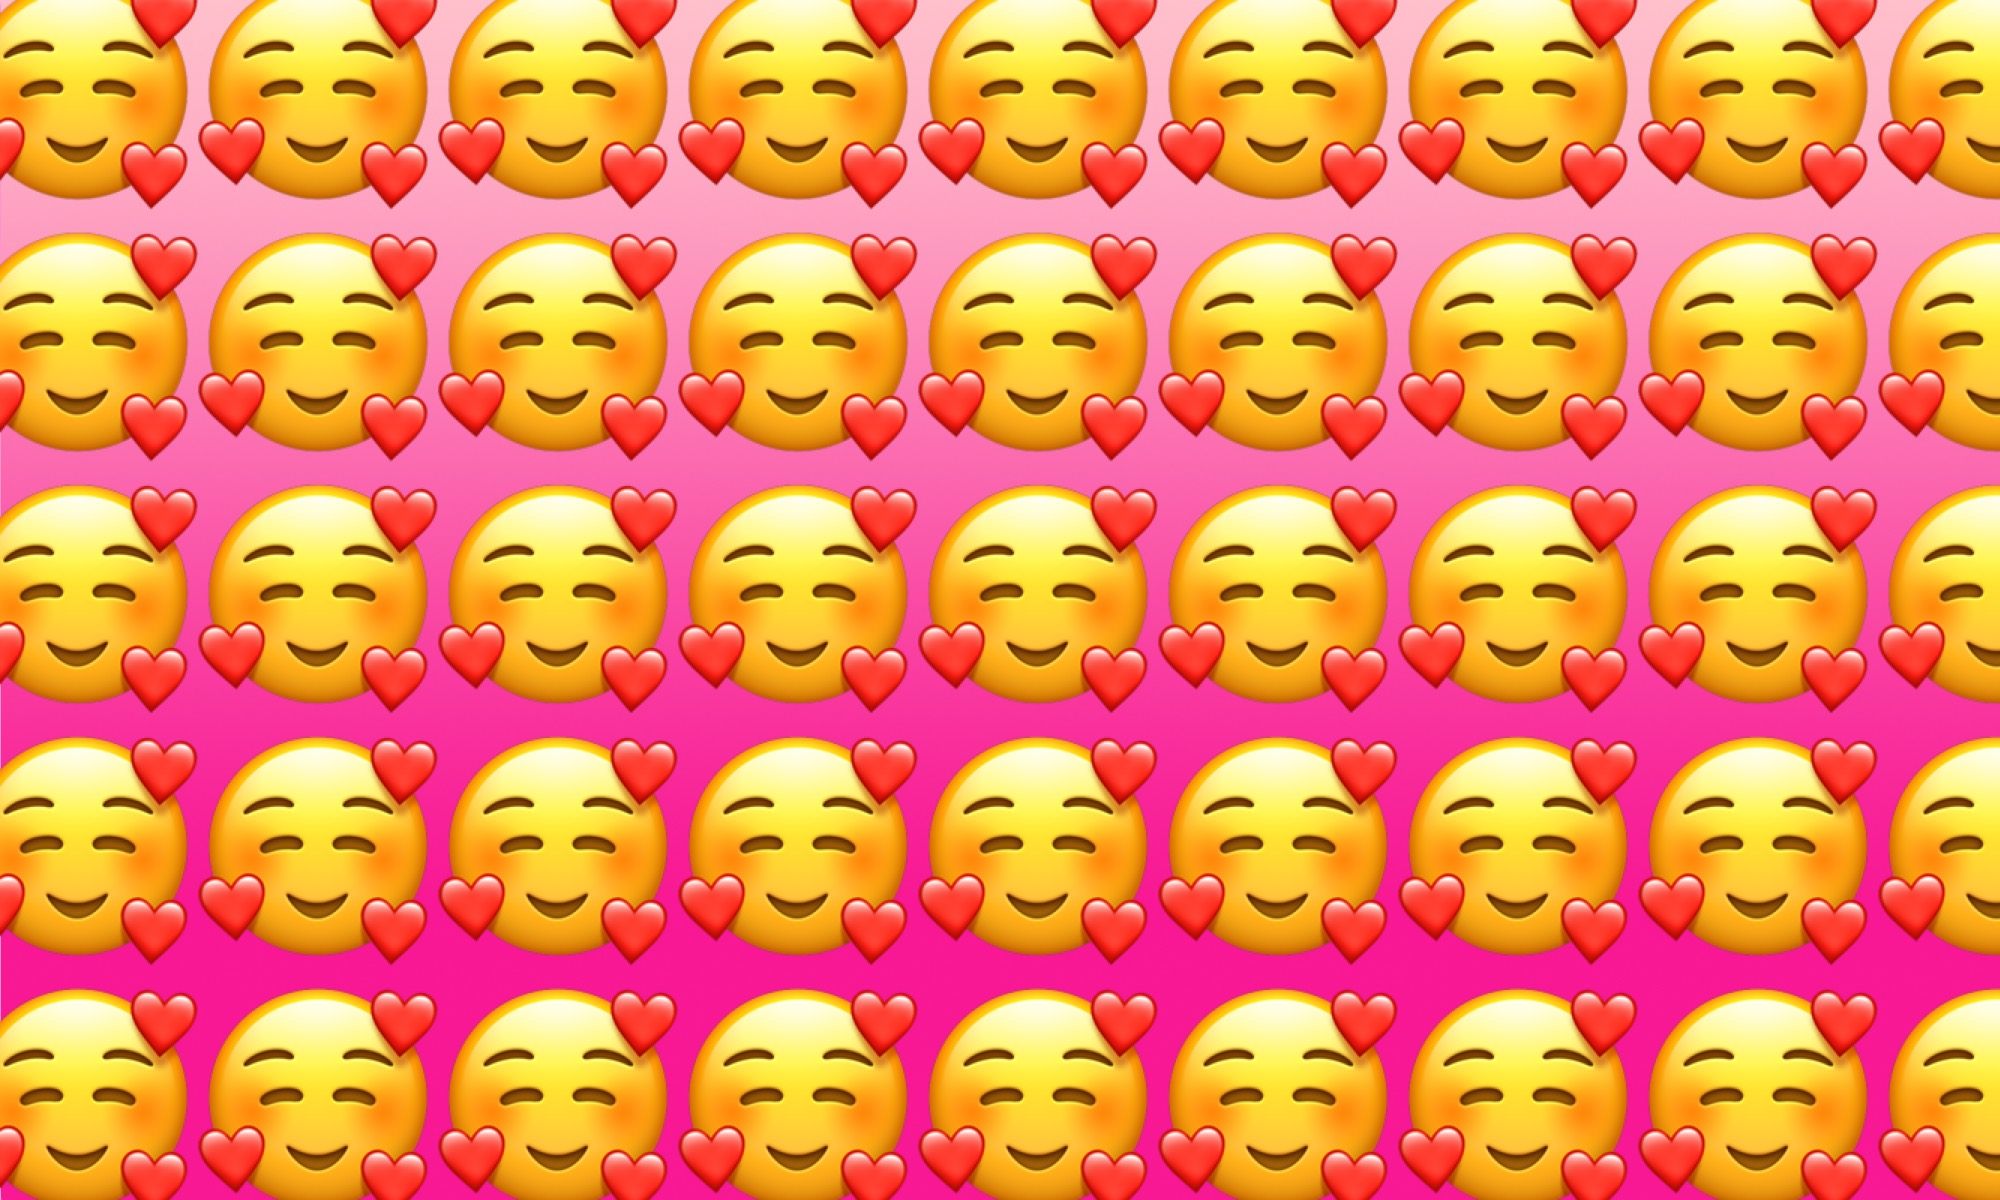 Man and woman making love emoji Emojiology Smiling Face With Hearts